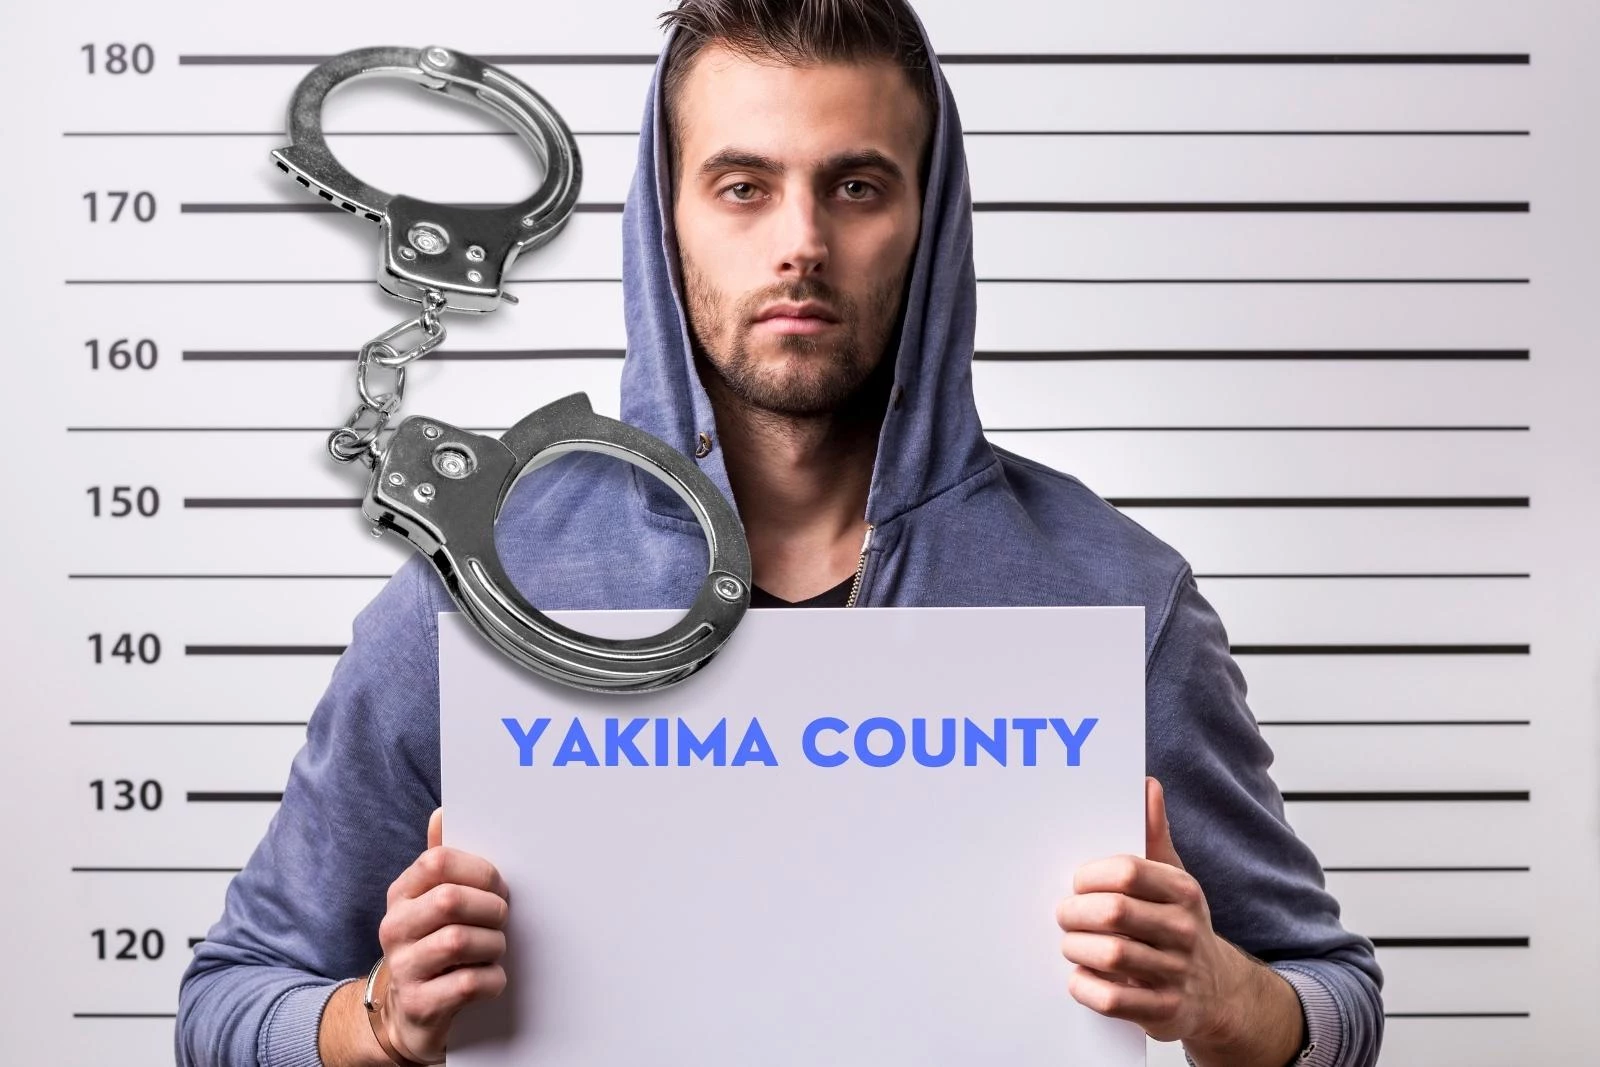 Nearly 30 Folks Got Locked Up in Yakima County Jail This Weekend image